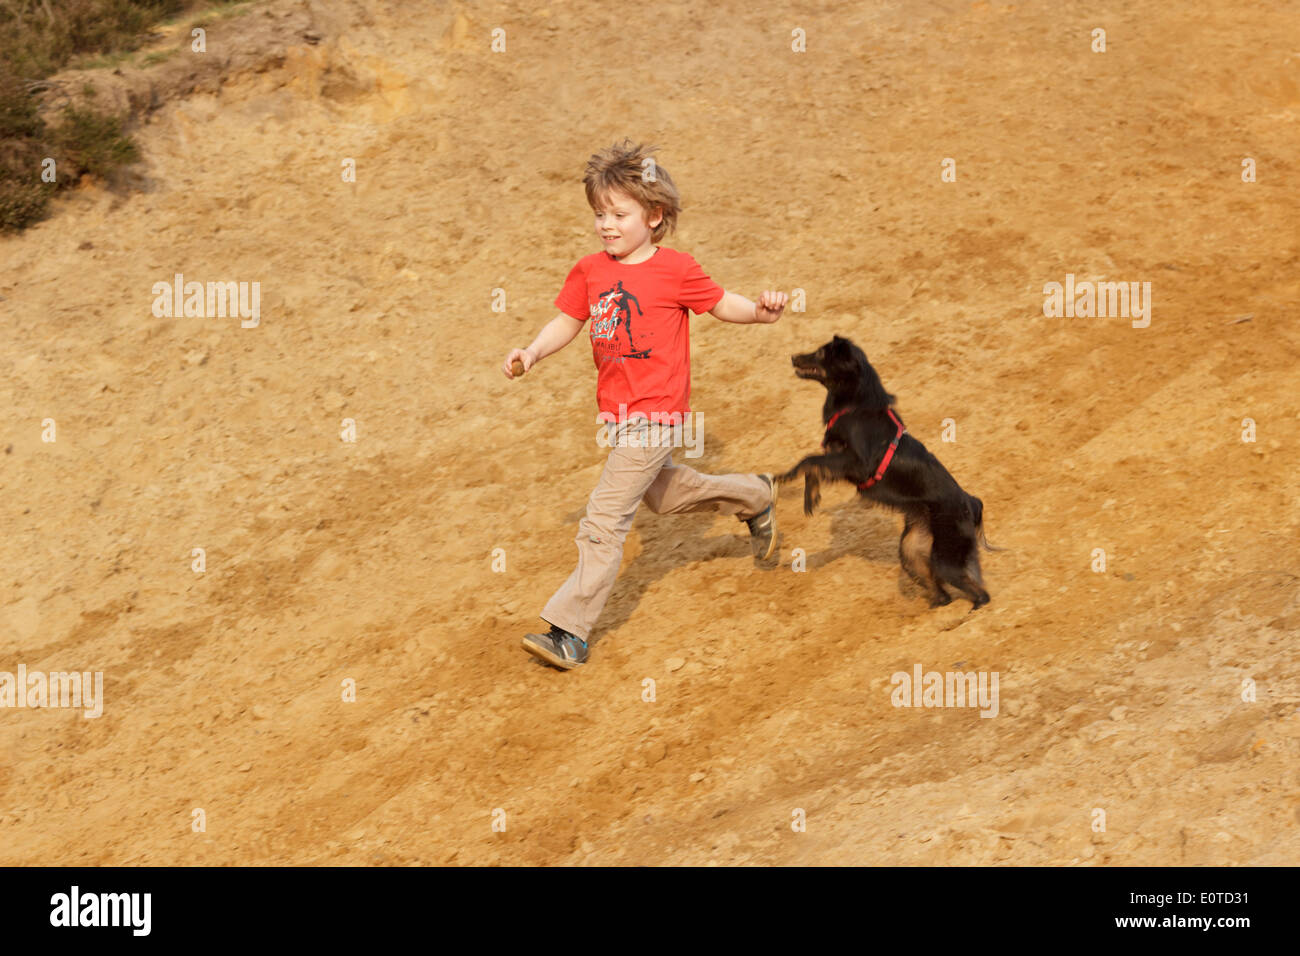 young boy running with his dog jumping beside him Stock Photo